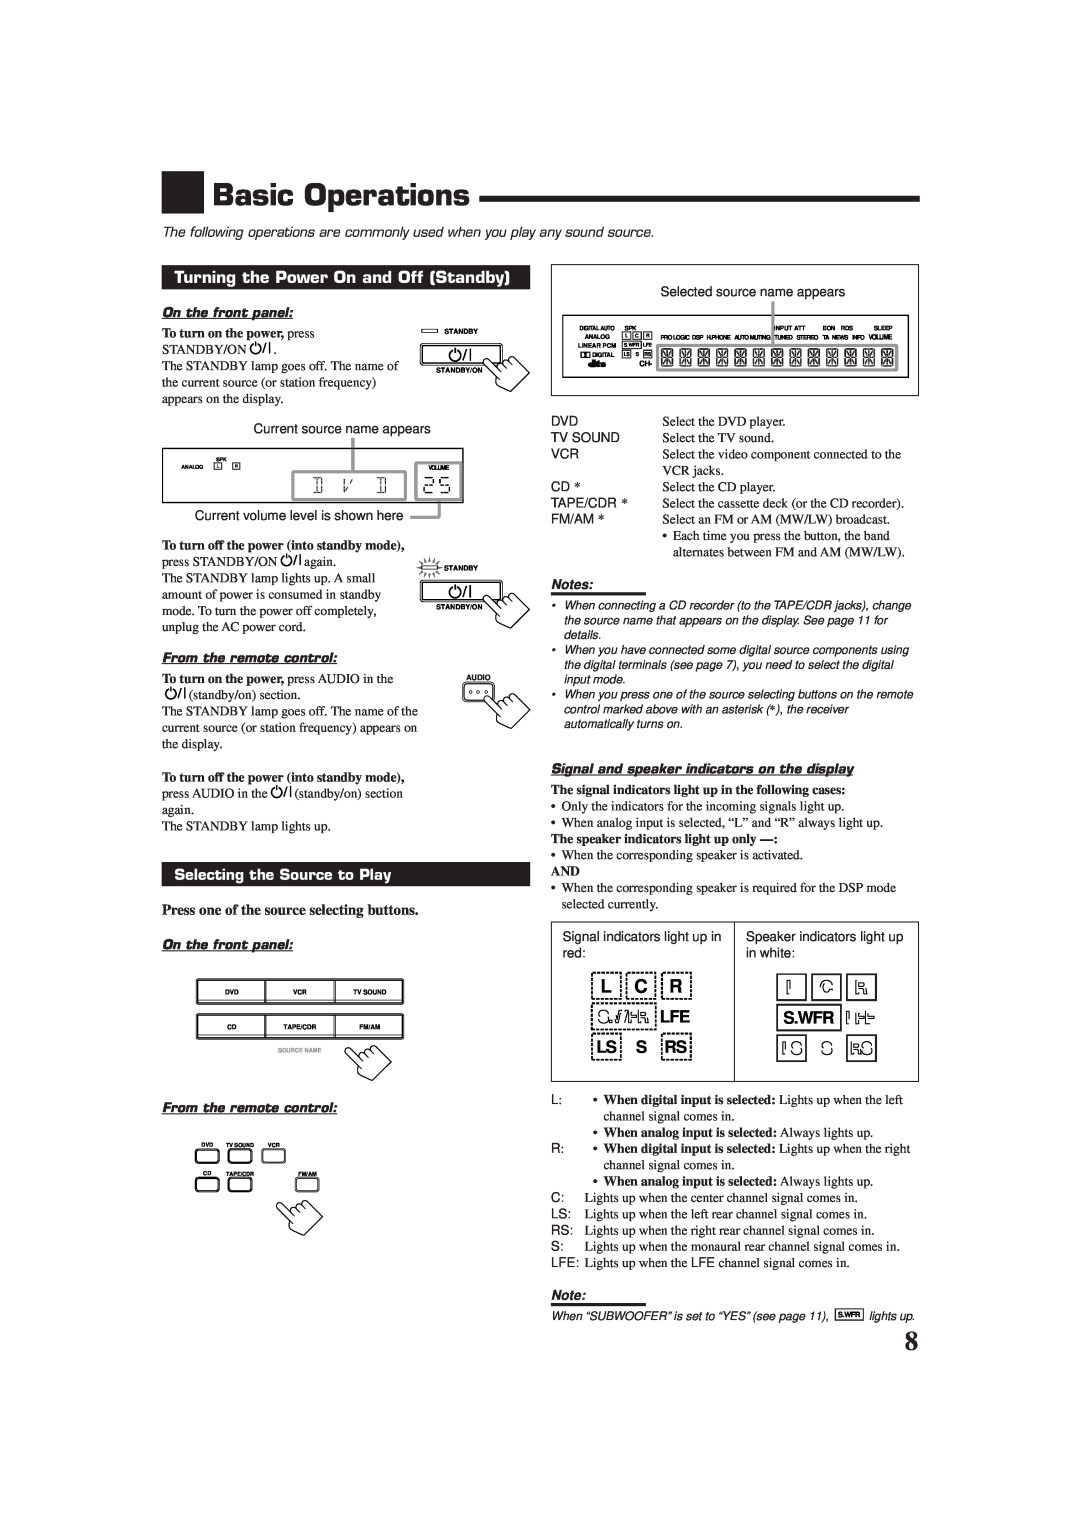 JVC RX-6012RSL manual Basic Operations, Turning the Power On and Off Standby, S.Wfr Lfe Ls S Rs, L C R, On the front panel 